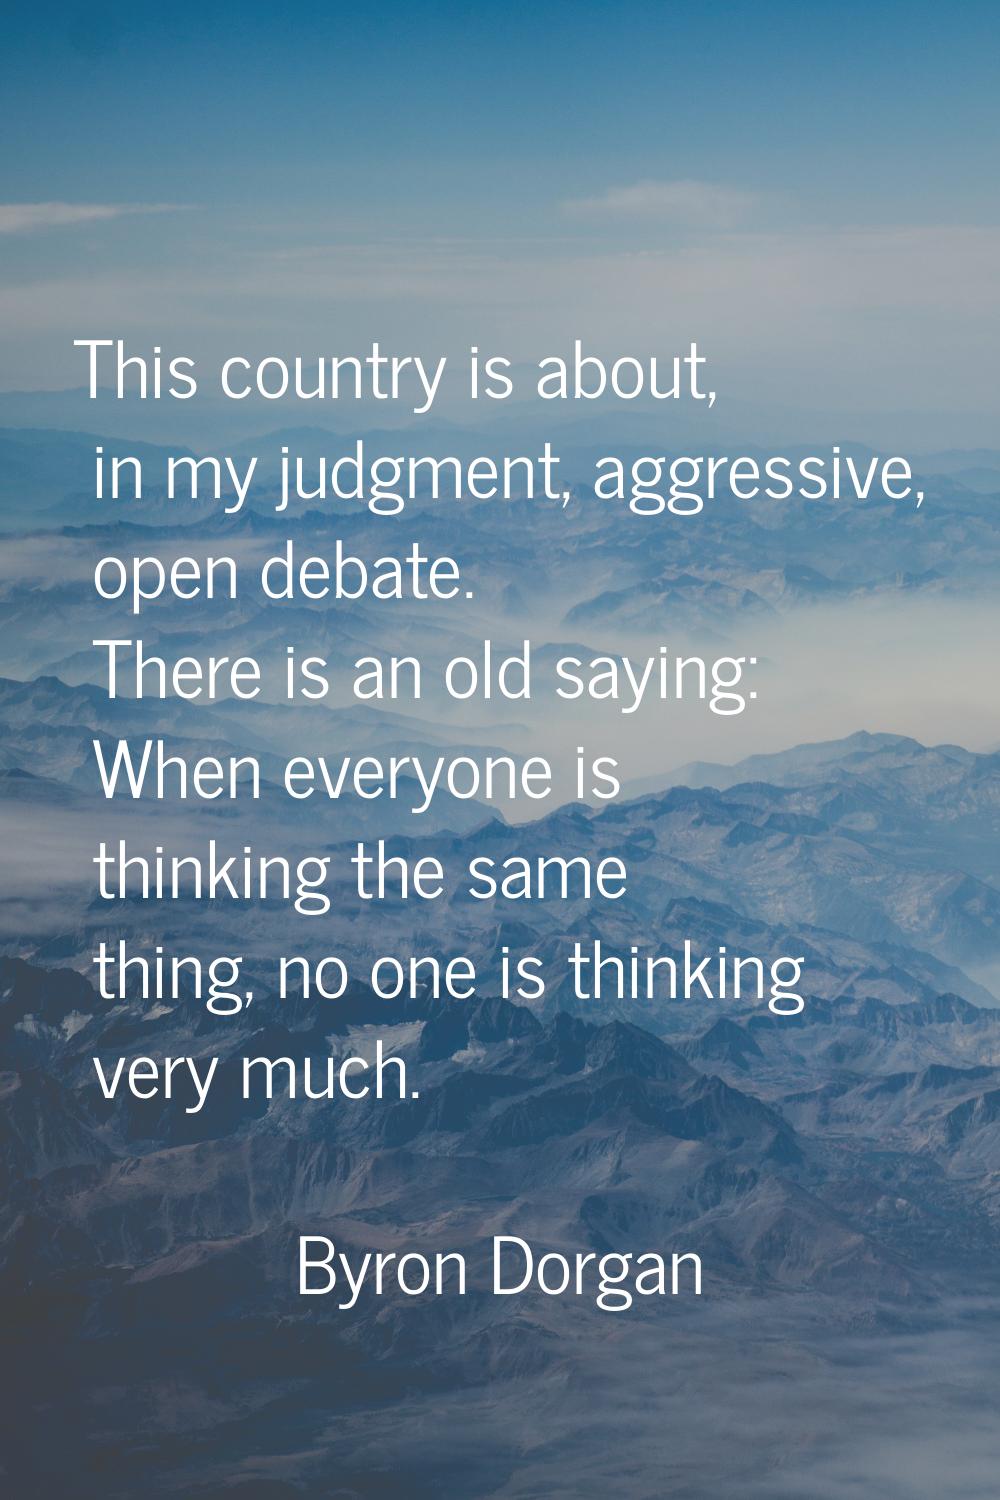 This country is about, in my judgment, aggressive, open debate. There is an old saying: When everyo